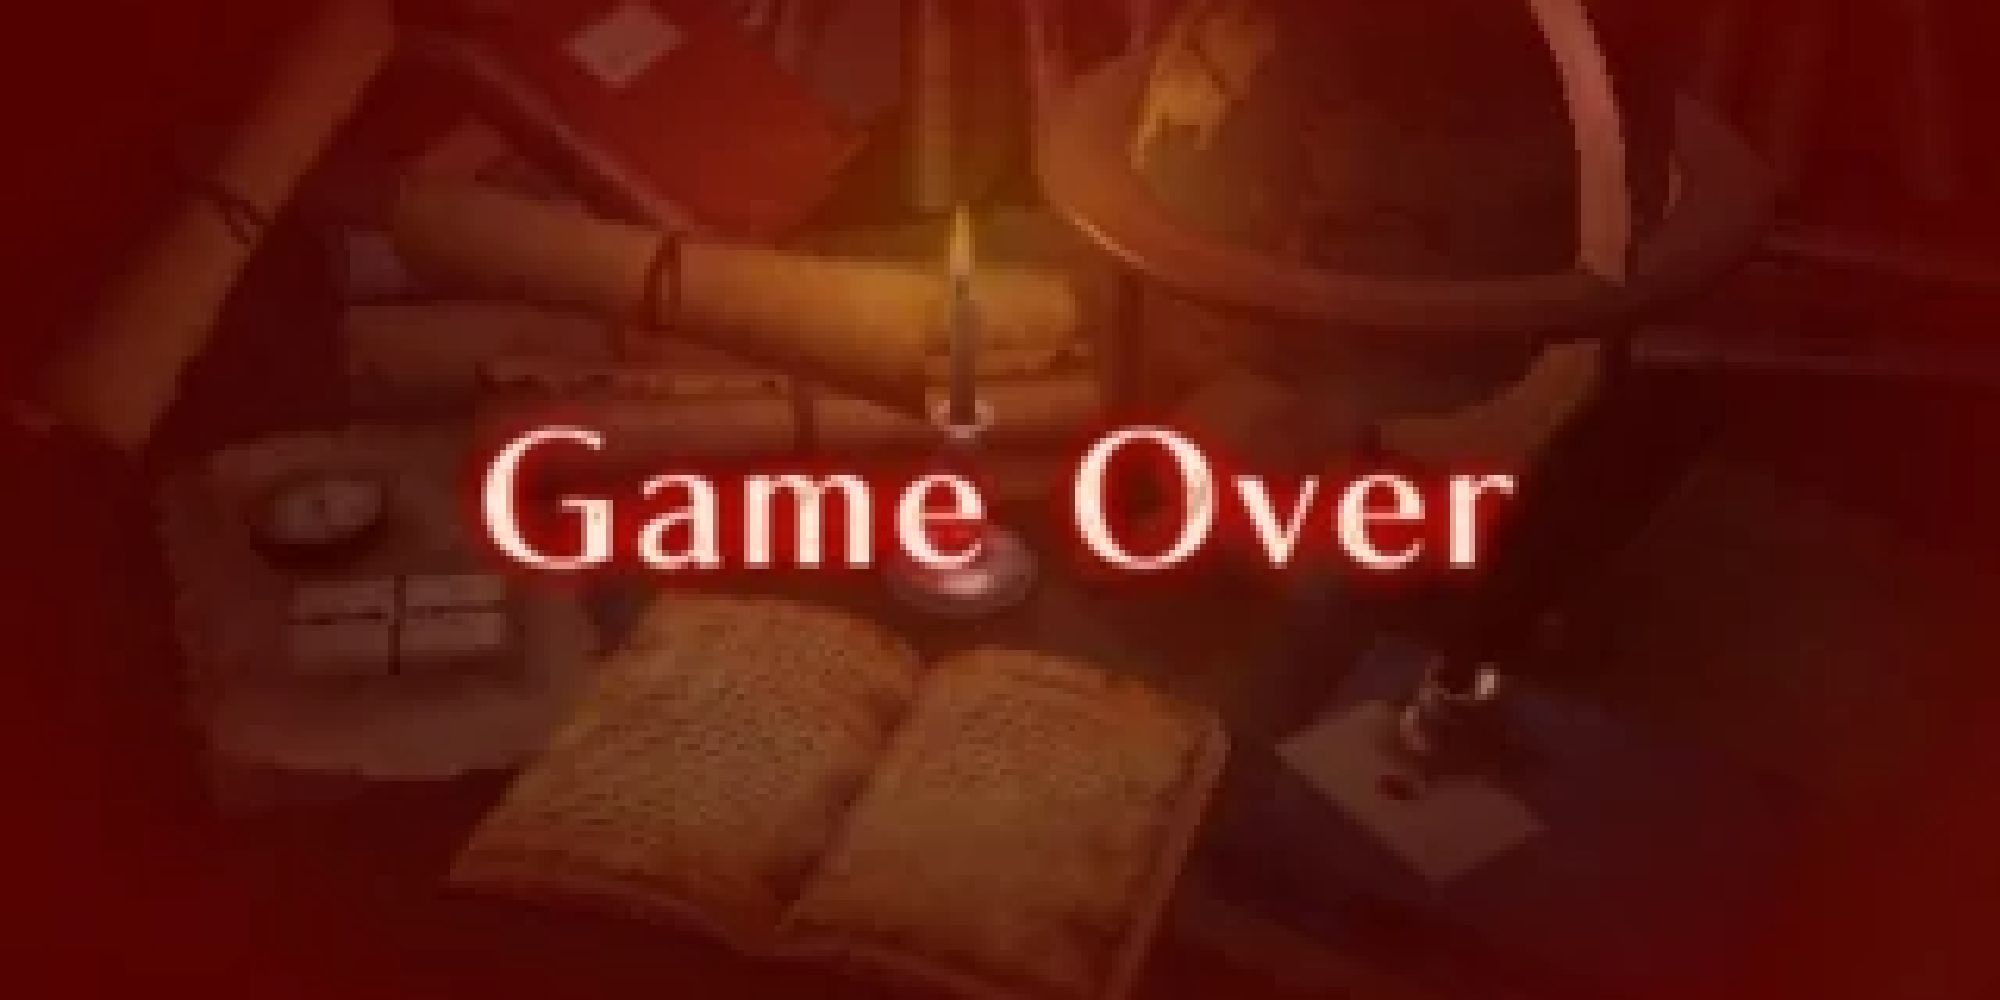 The game over screen in Fire Emblem Awakening